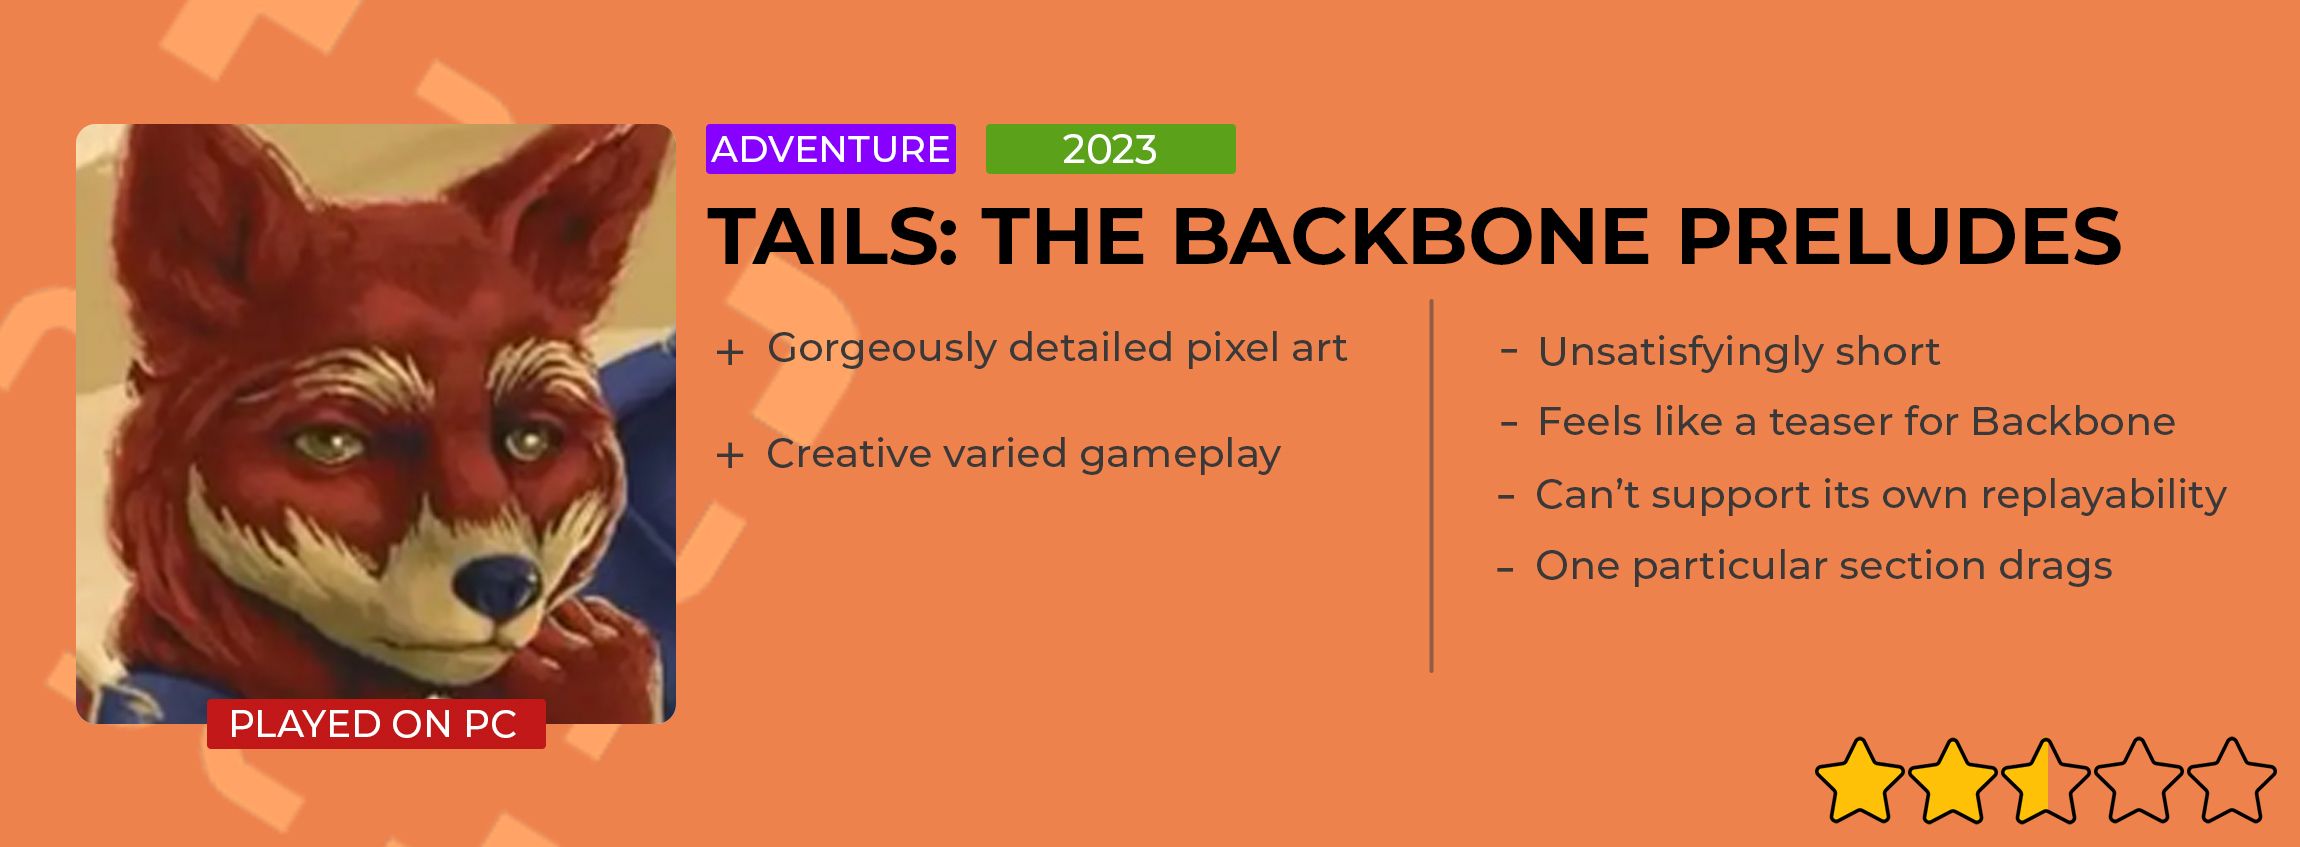 Tails The Backbone Preludes review card giving it a 2.5/5.